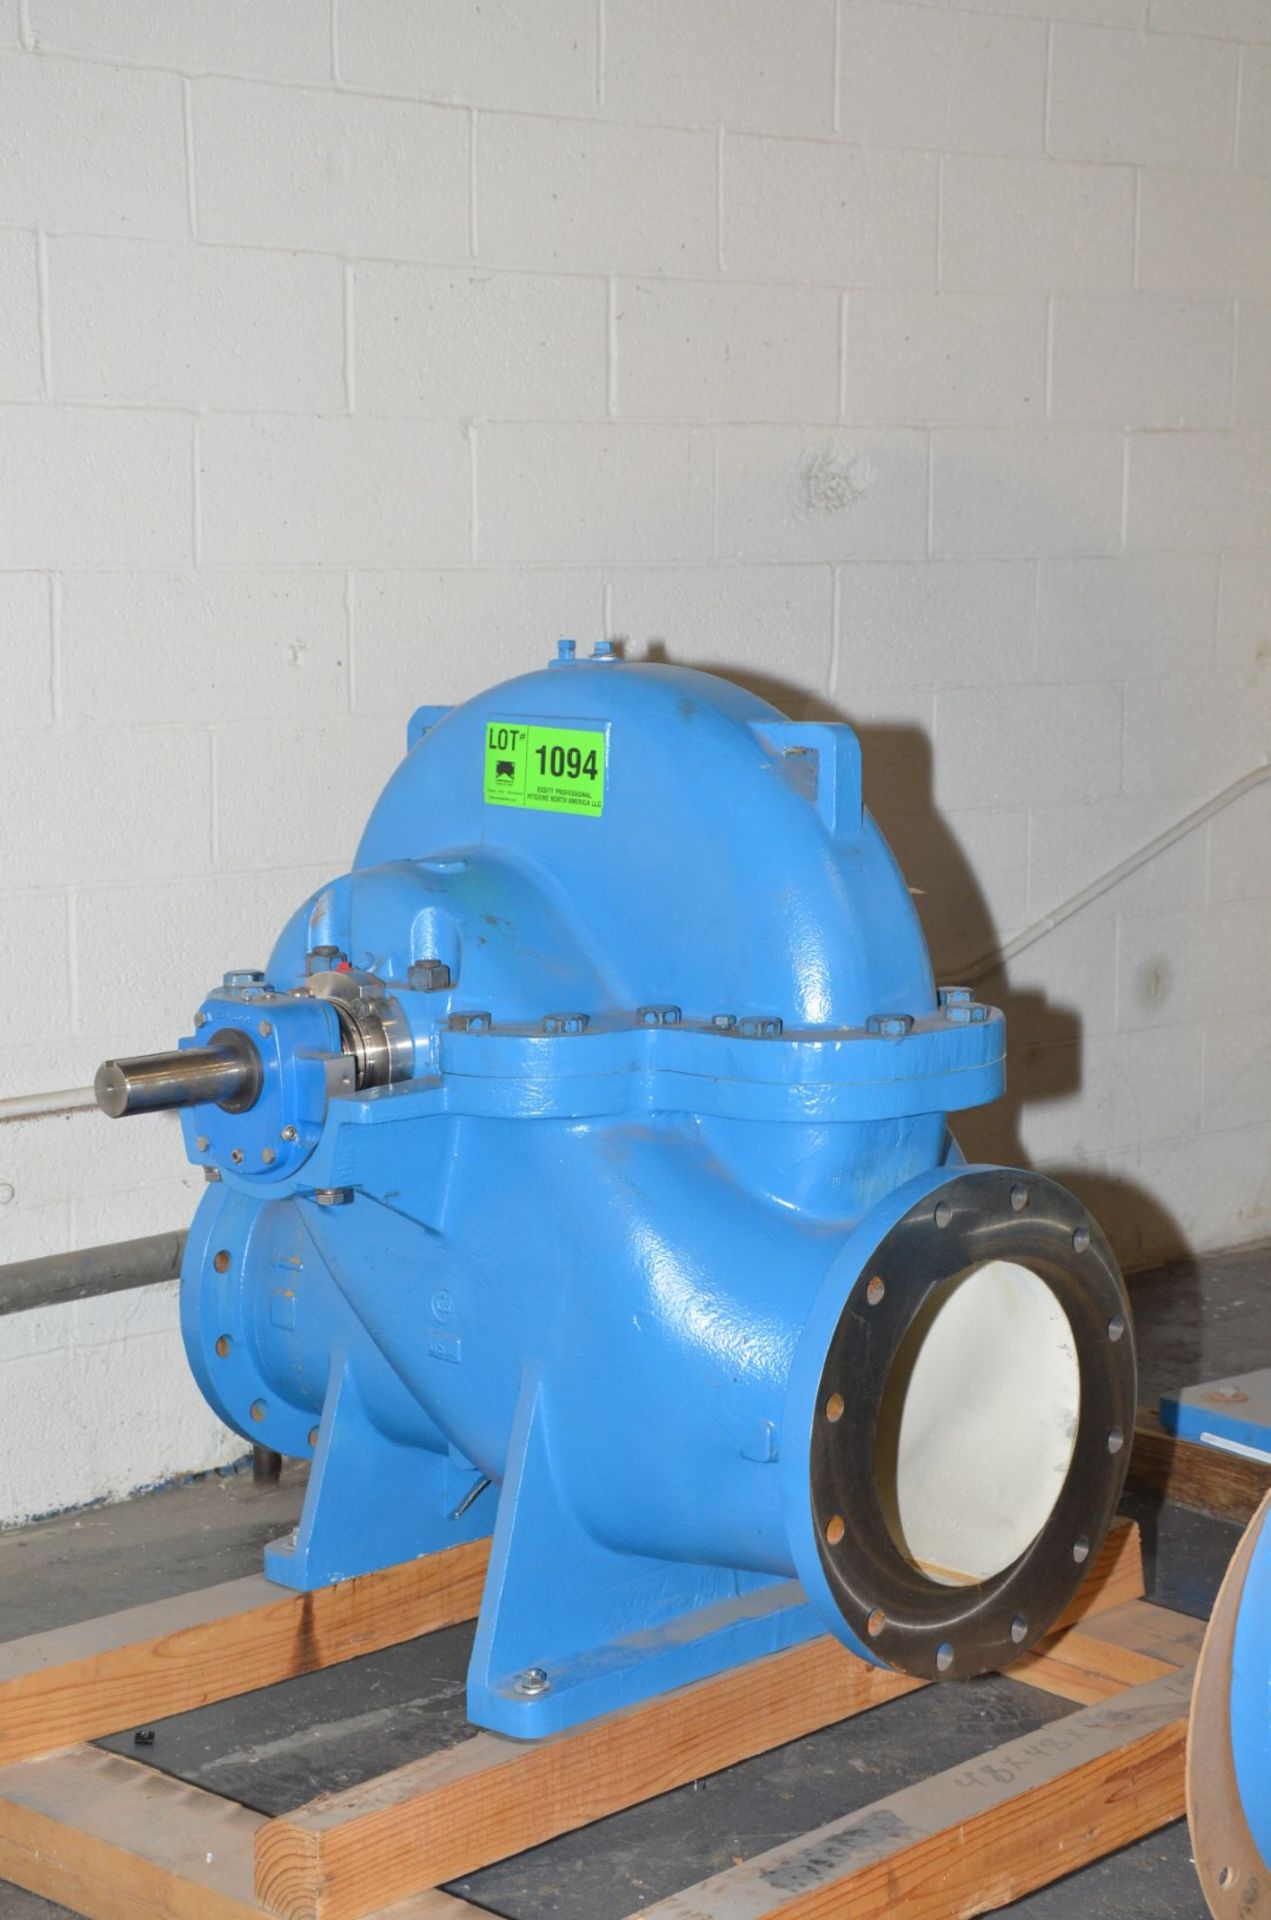 GOULDS FAN PUMP WITH 10" INLET I.D., 12" OUTLET I.D. [RIGGING FEE FOR LOT #1094 - $25 USD PLUS